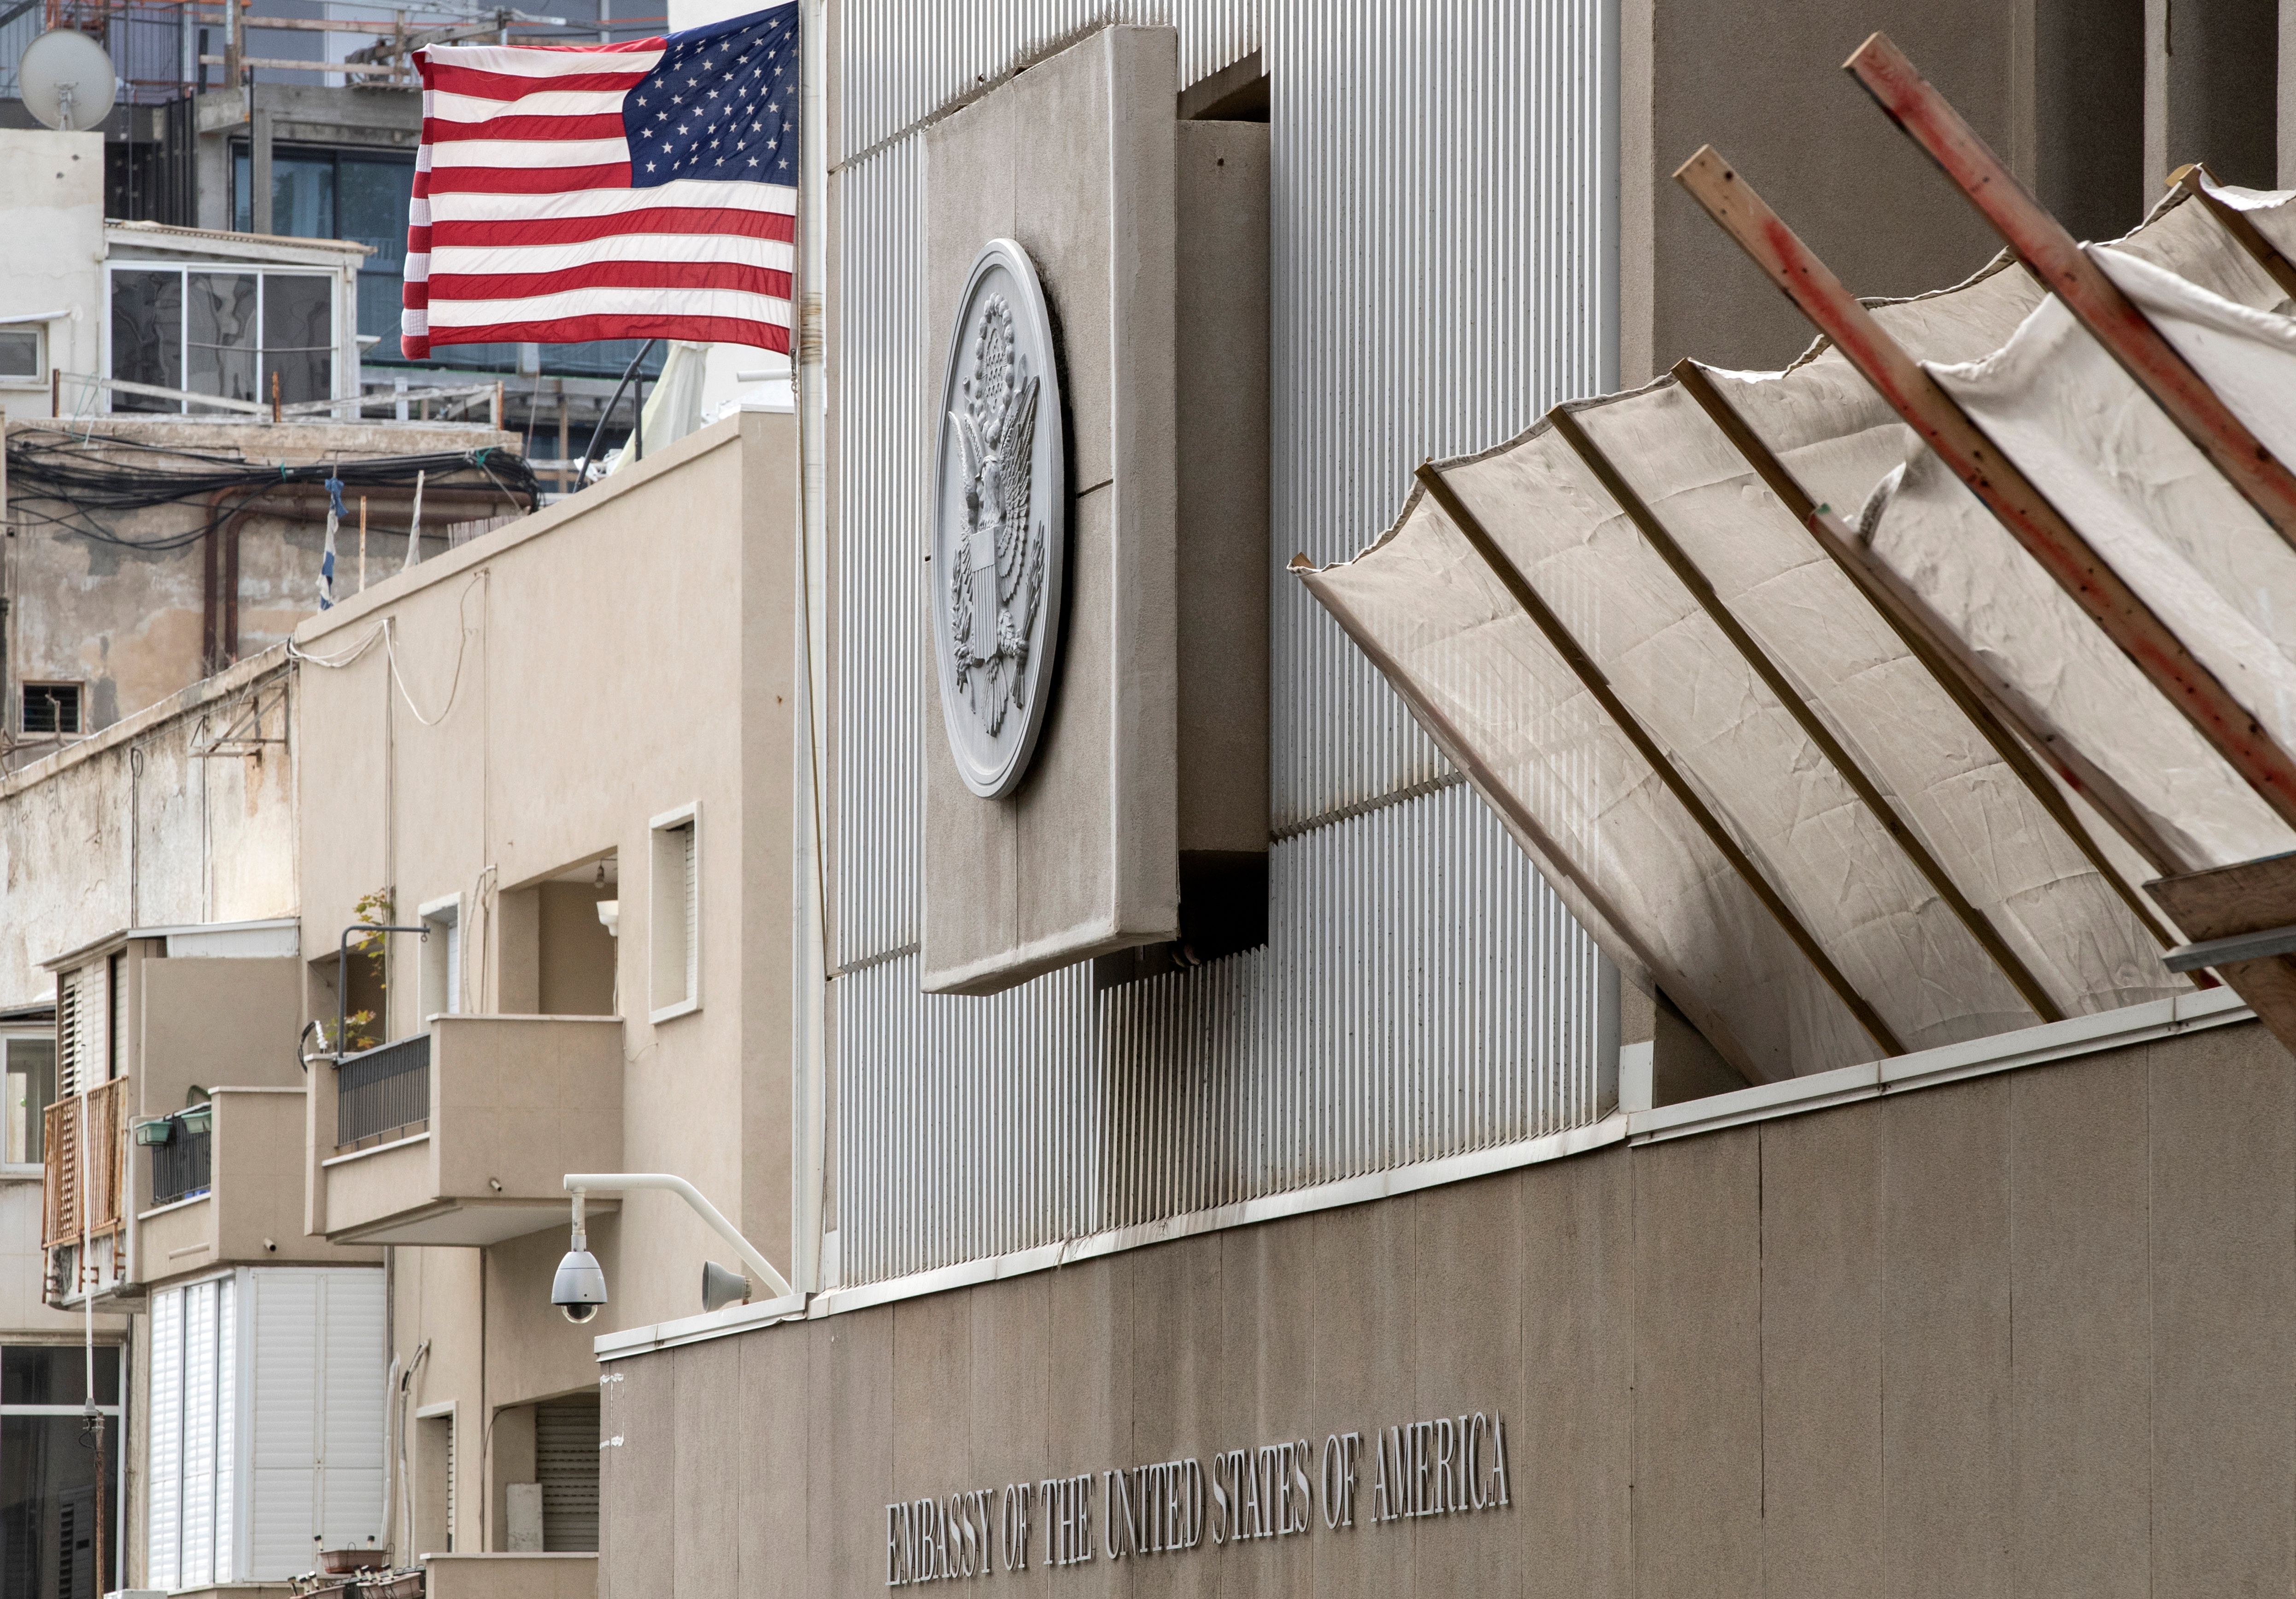 A picture shows the exterior of the US embassy in Tel Aviv on December 6, 2017. President Donald Trump is set to recognise Jerusalem as Israel's capital, upending decades of careful US policy and ignoring dire warnings from Arab and Western allies alike of a historic misstep that could trigger a surge of violence in the Middle East. / AFP PHOTO / JACK GUEZ (Photo credit should read JACK GUEZ/AFP/Getty Images)